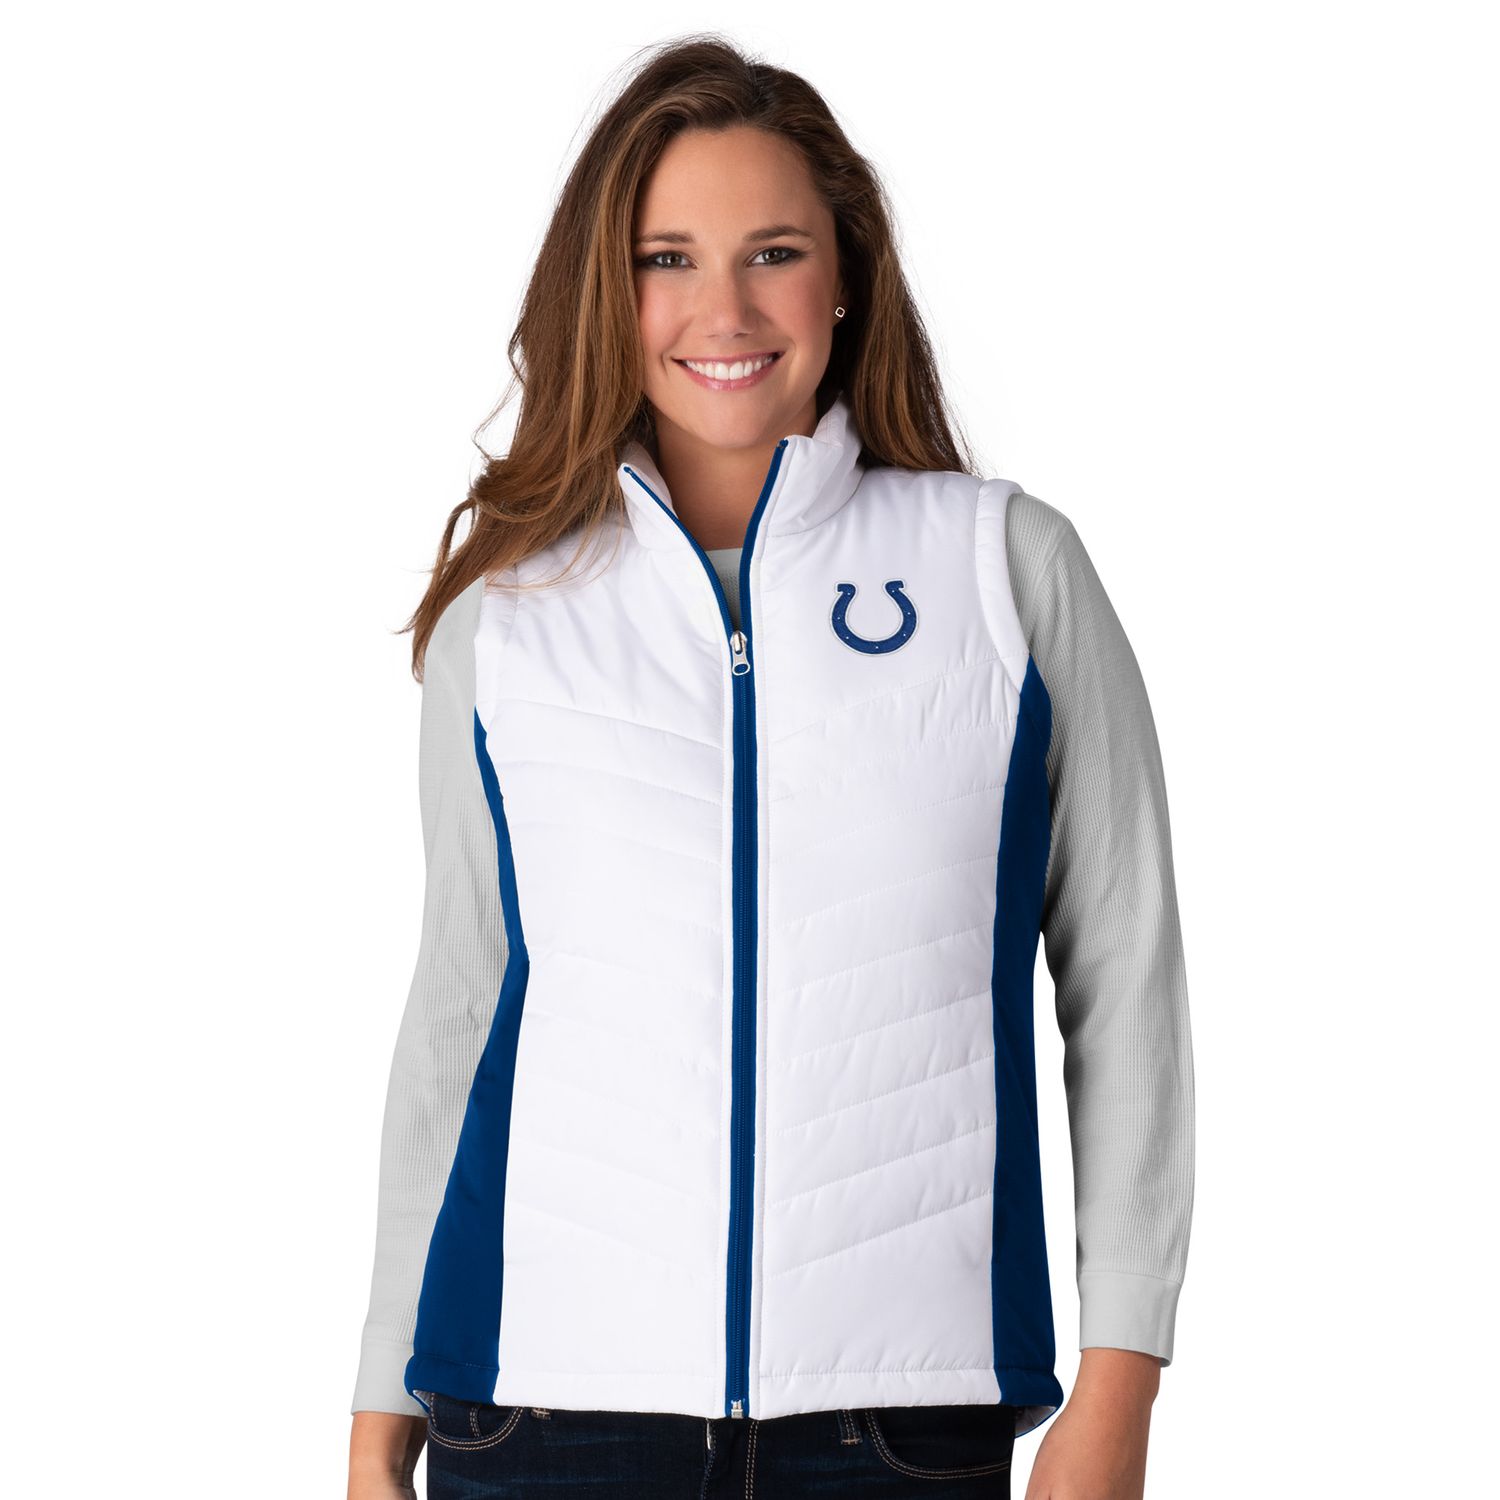 indianapolis colts womens